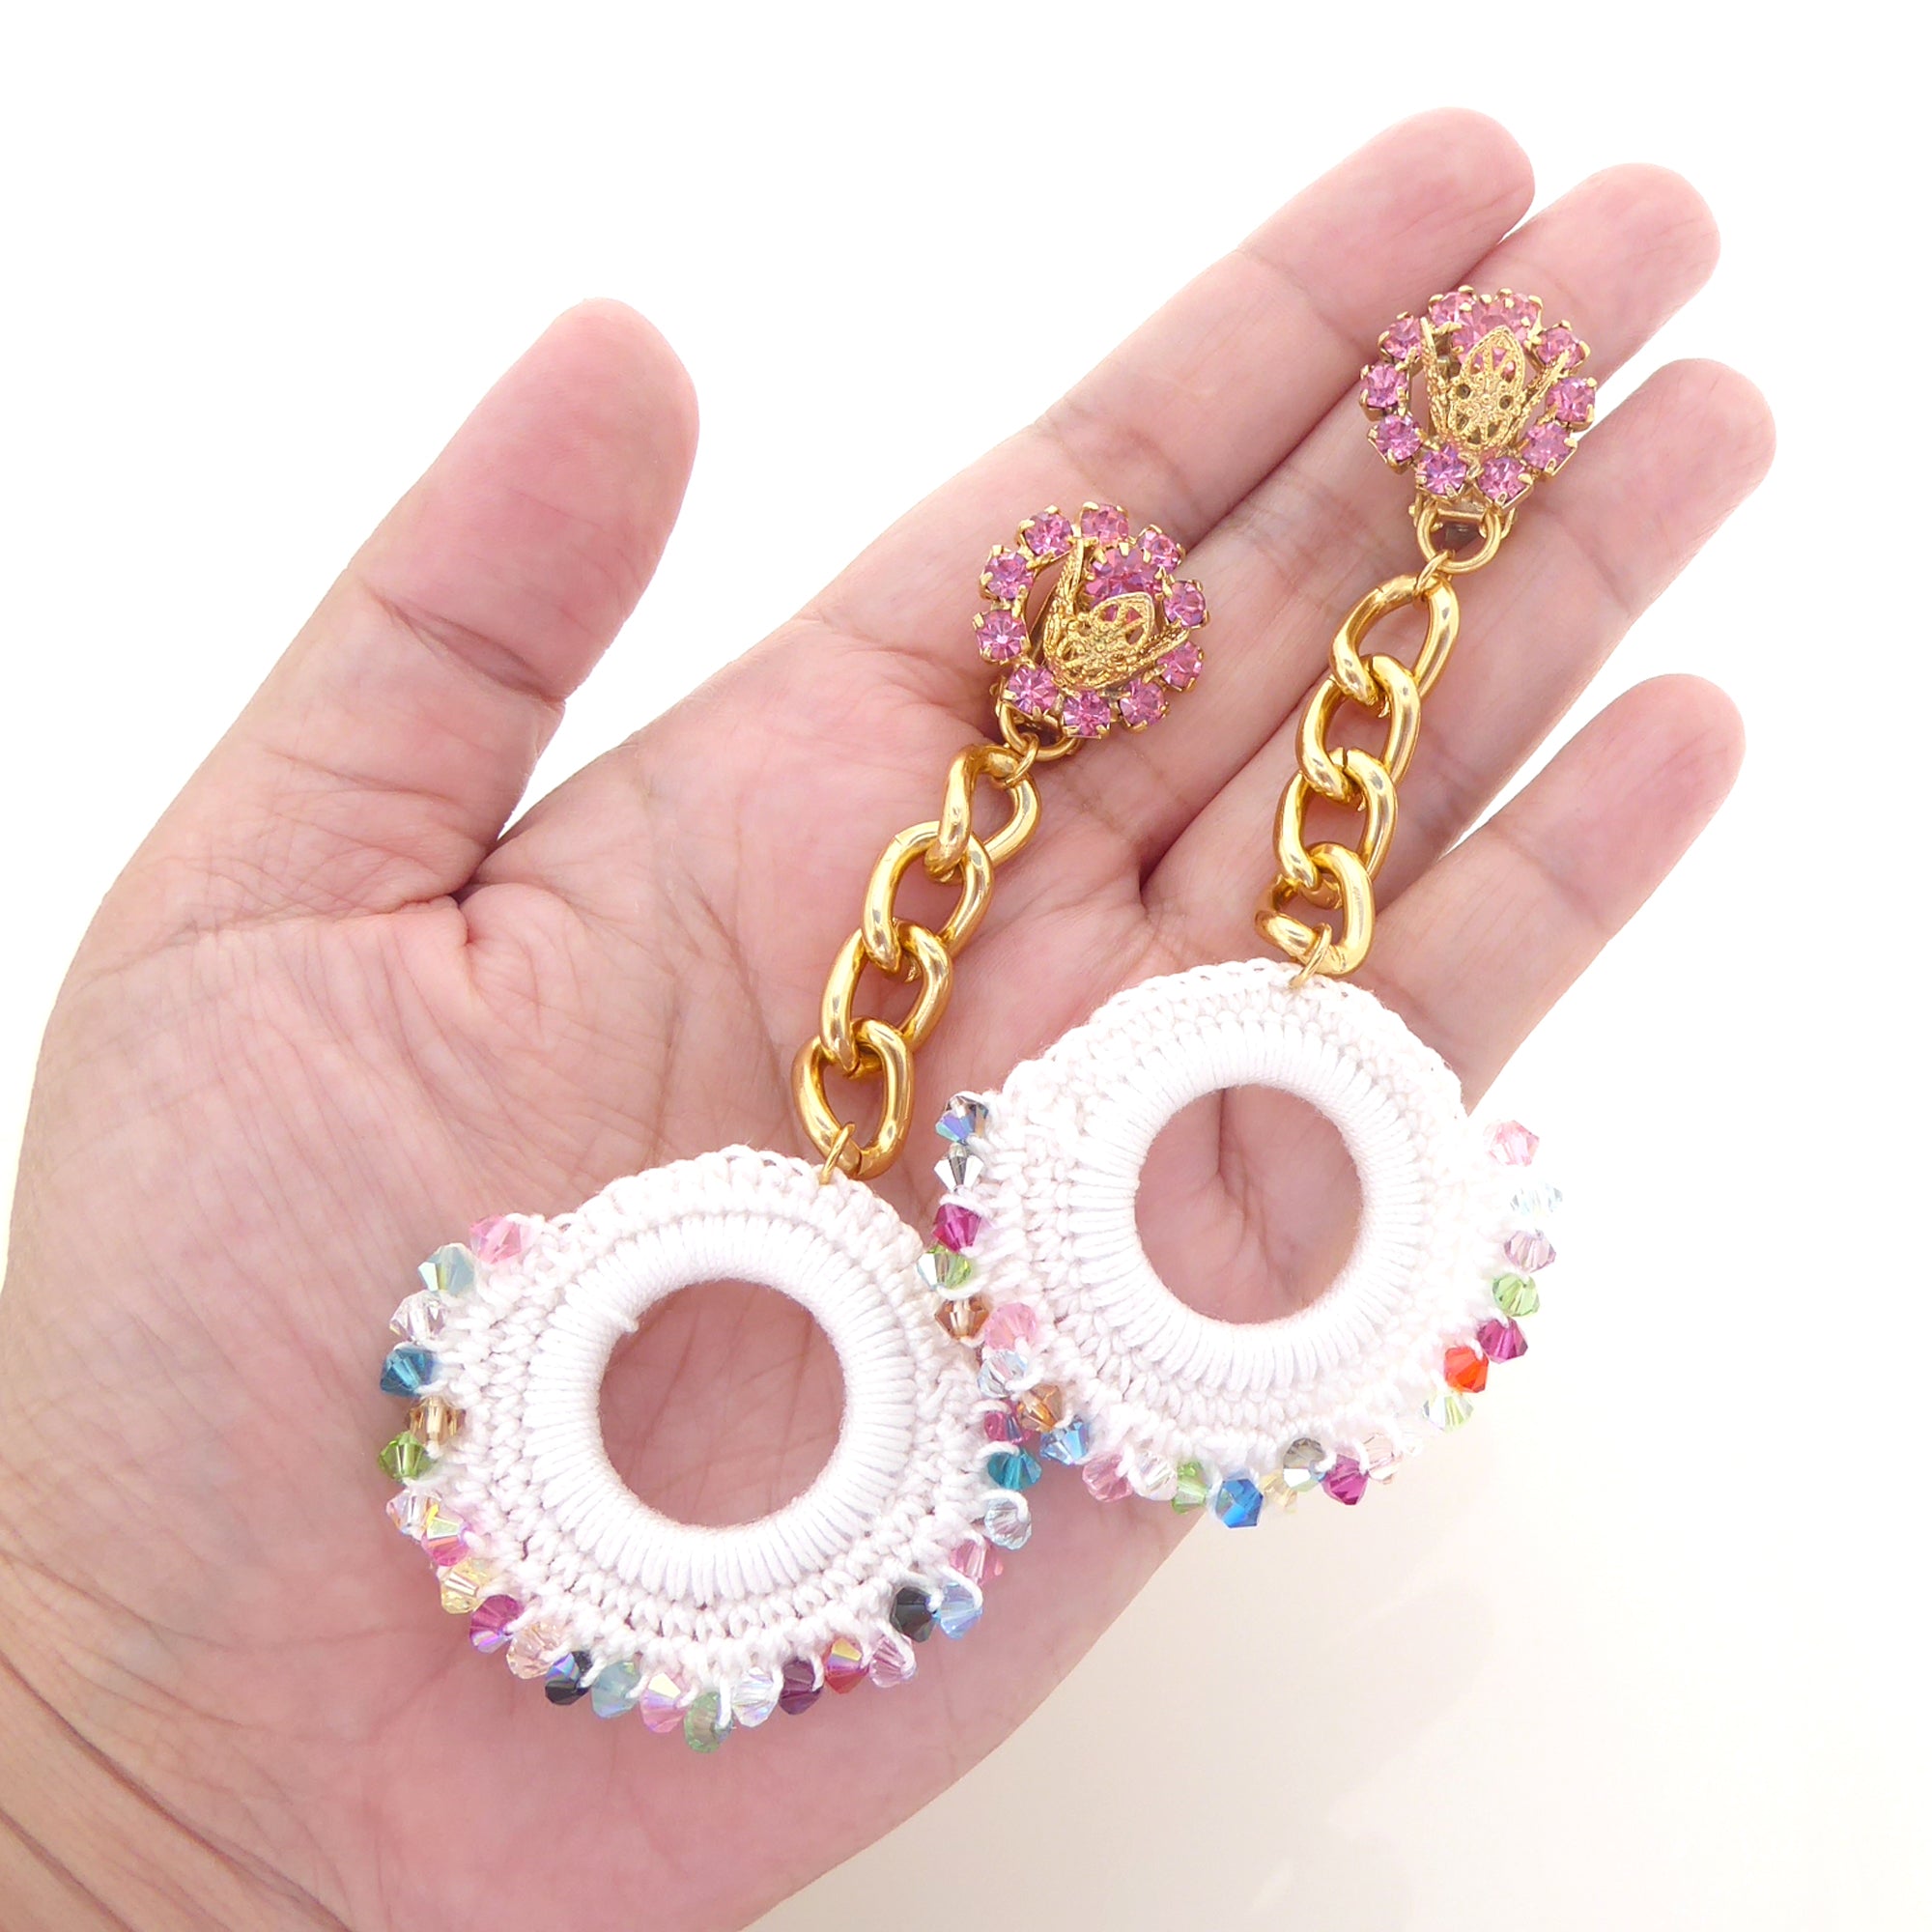 1950s Hot pink rhinestone gold white crochet rainbow beaded clip on earrings by Jenny Dayco 8